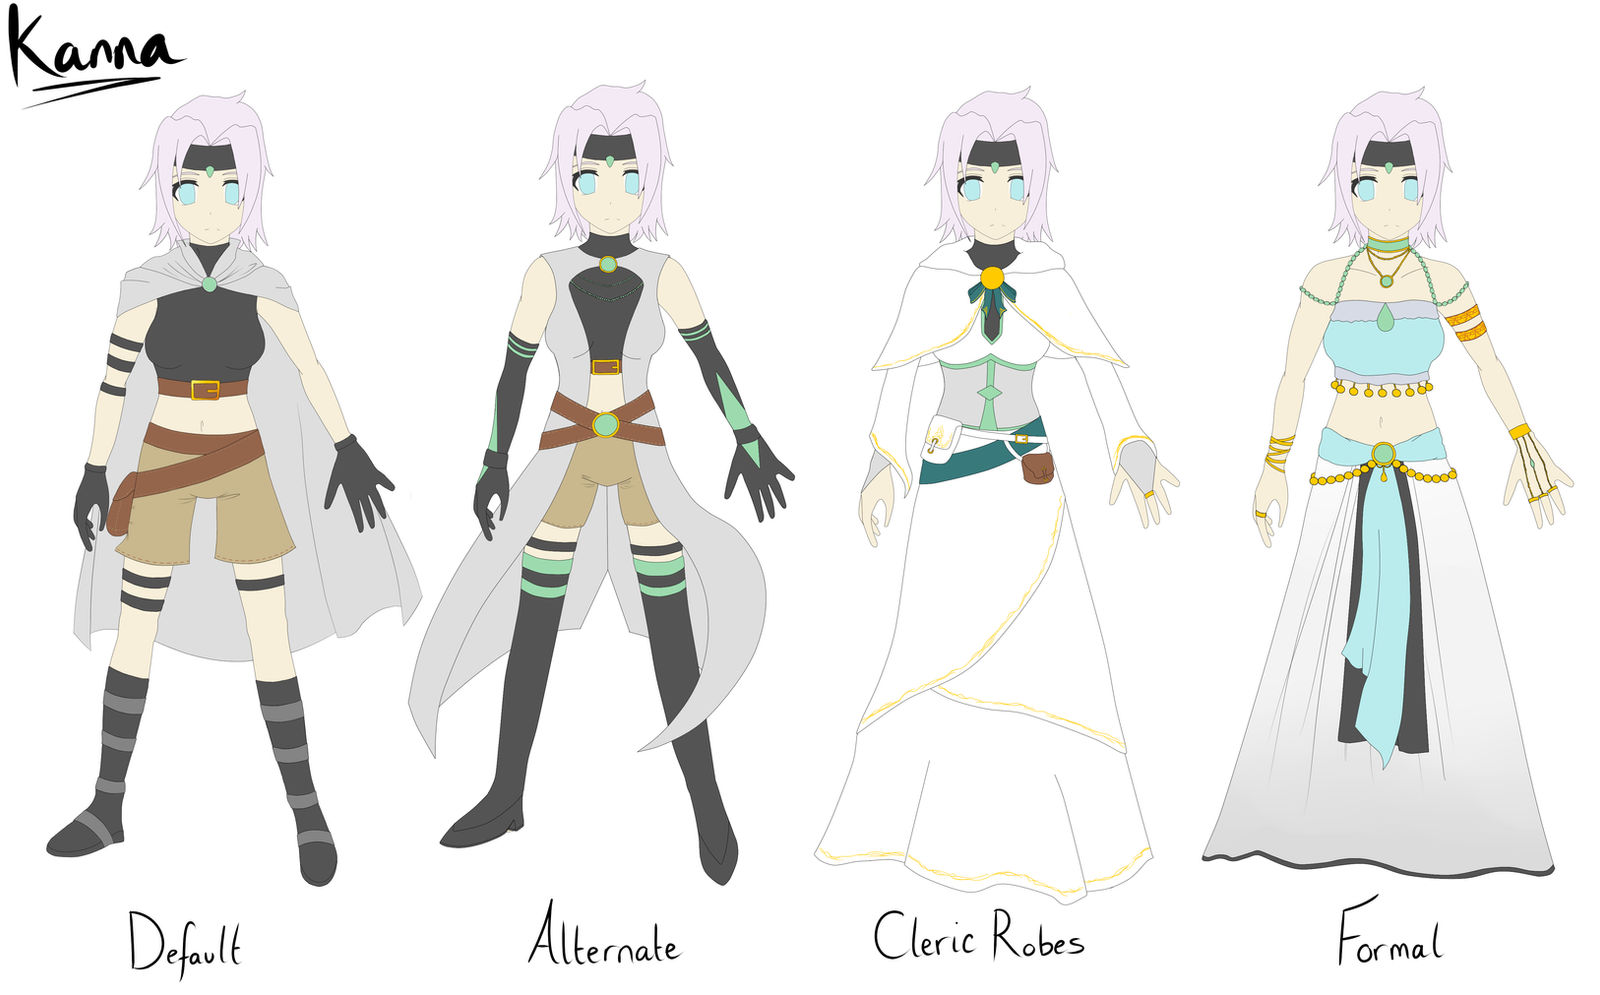 Outfit Reference Sheet - Kanna